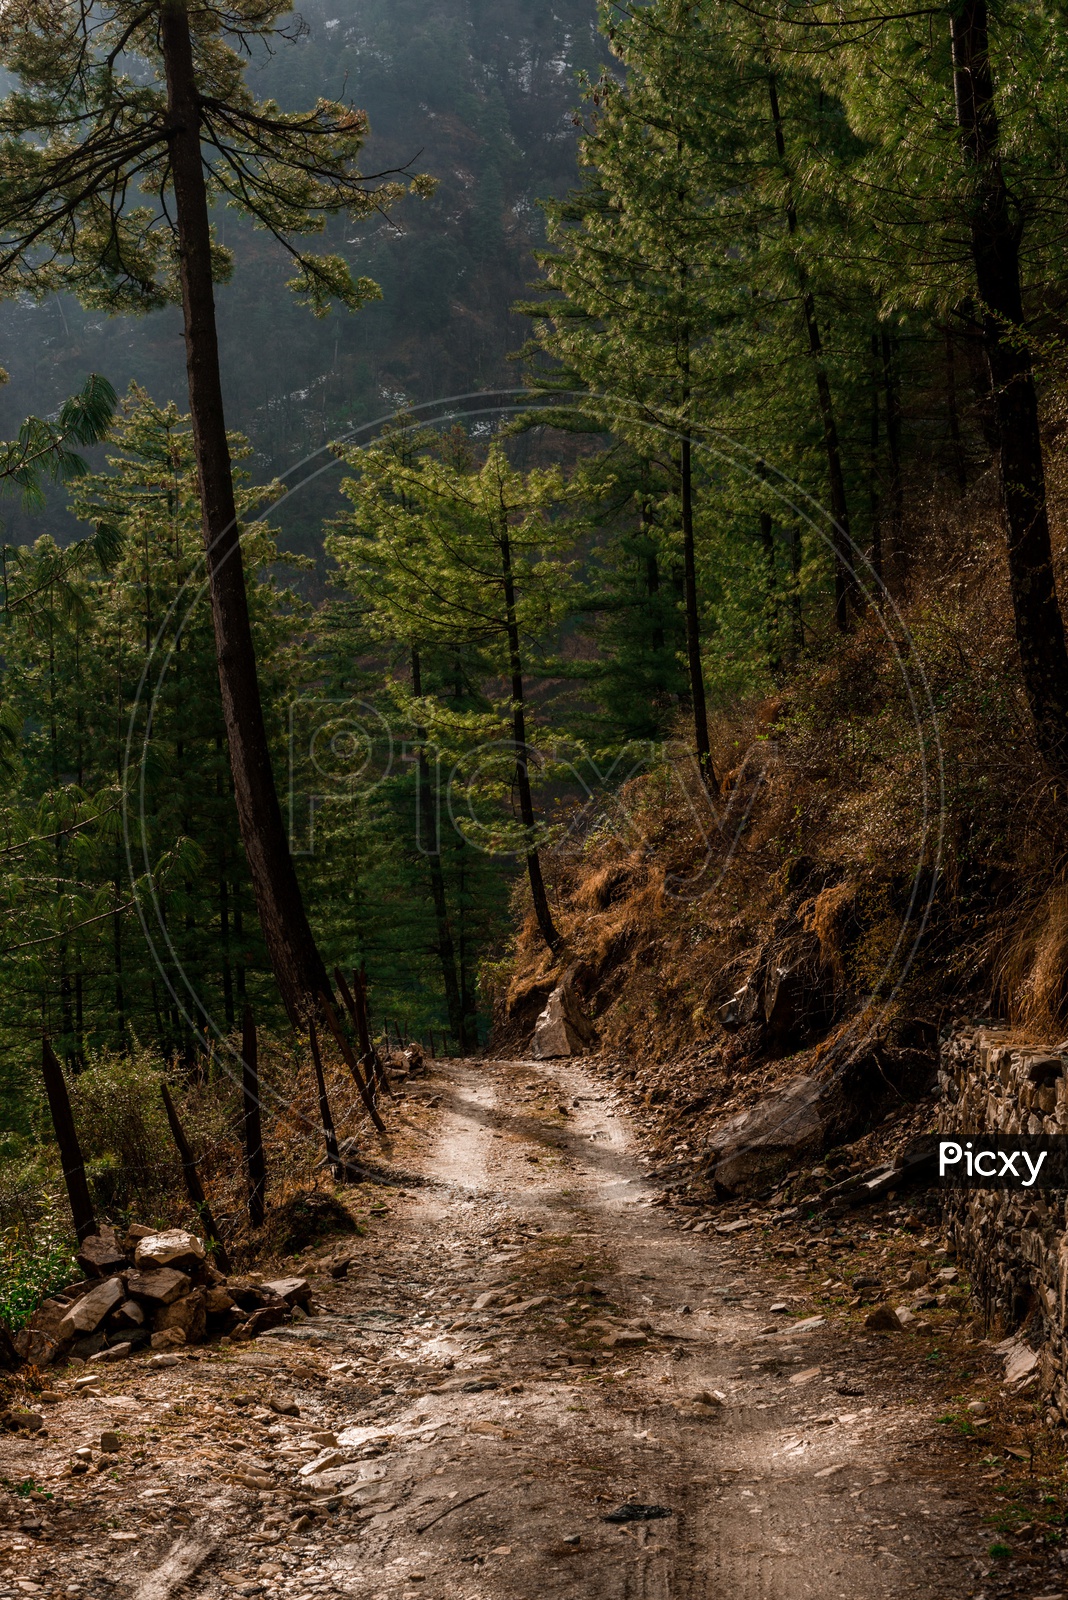 Mountain Roads in Himalayas surrounded by deodar trees